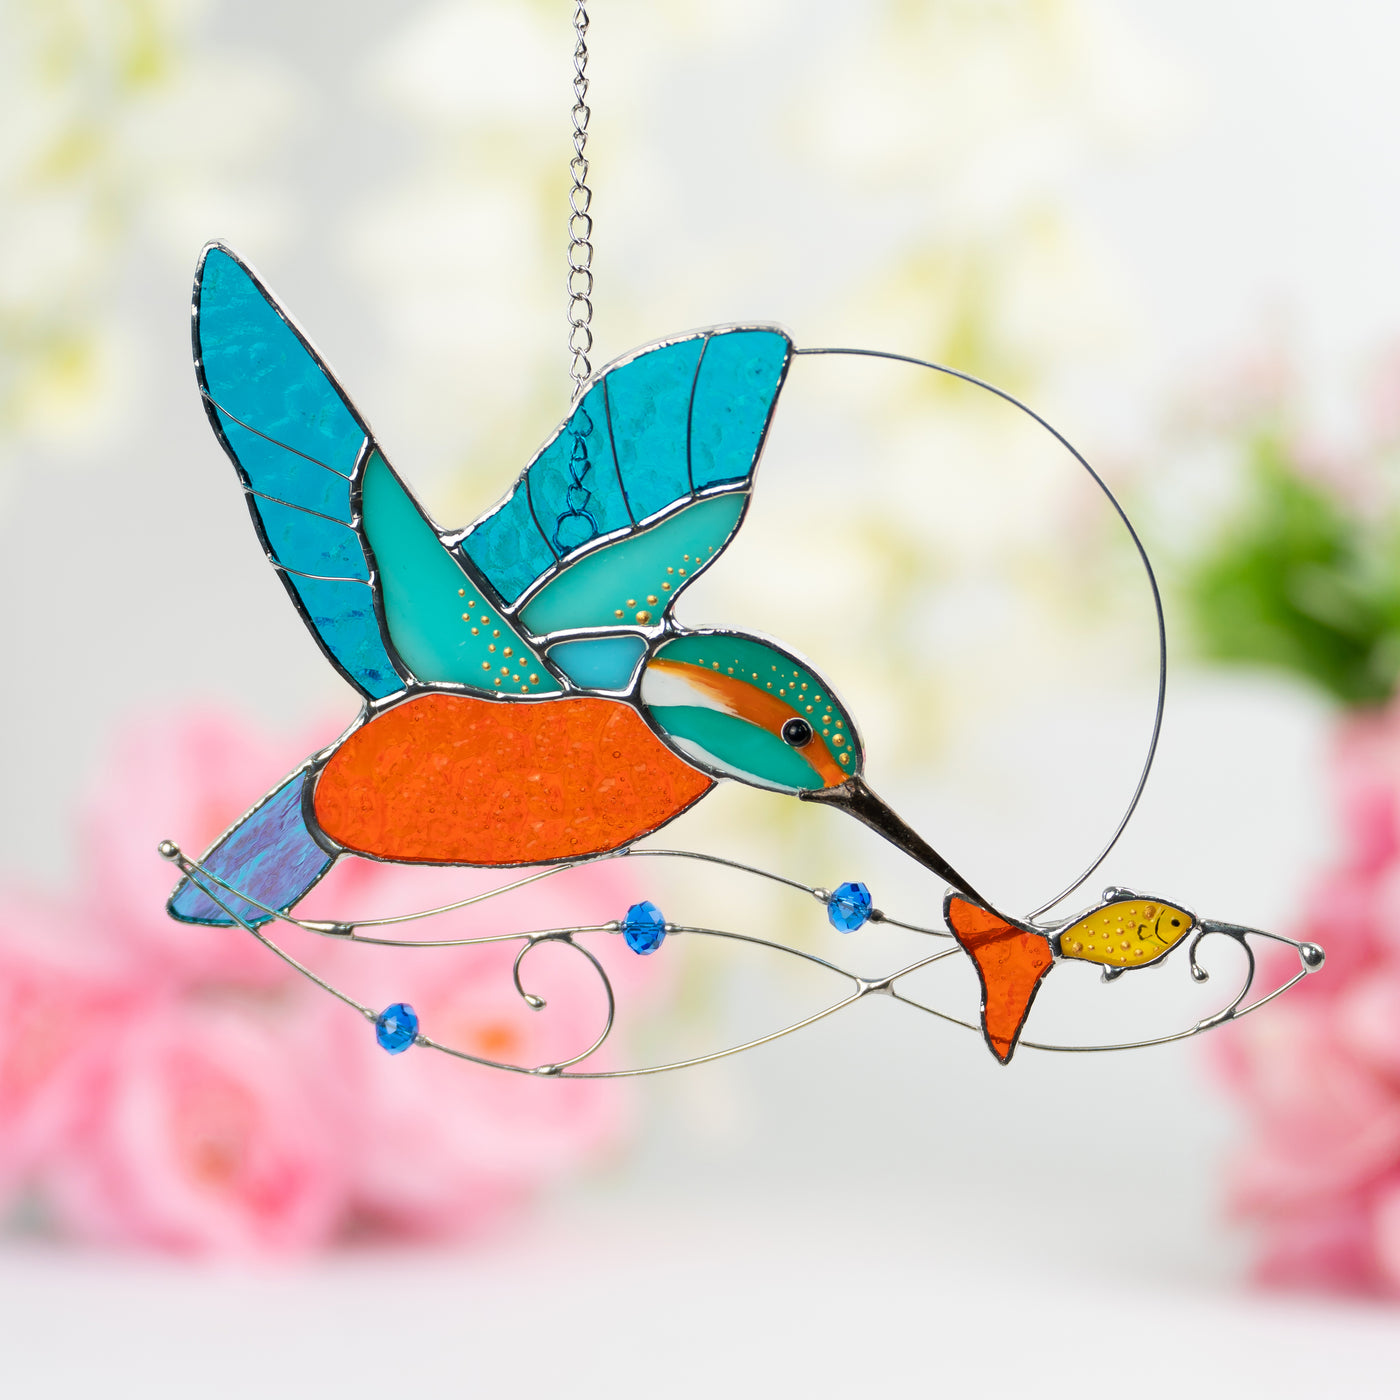 Stained glass suncatcher of a kingfisher bird with the fish